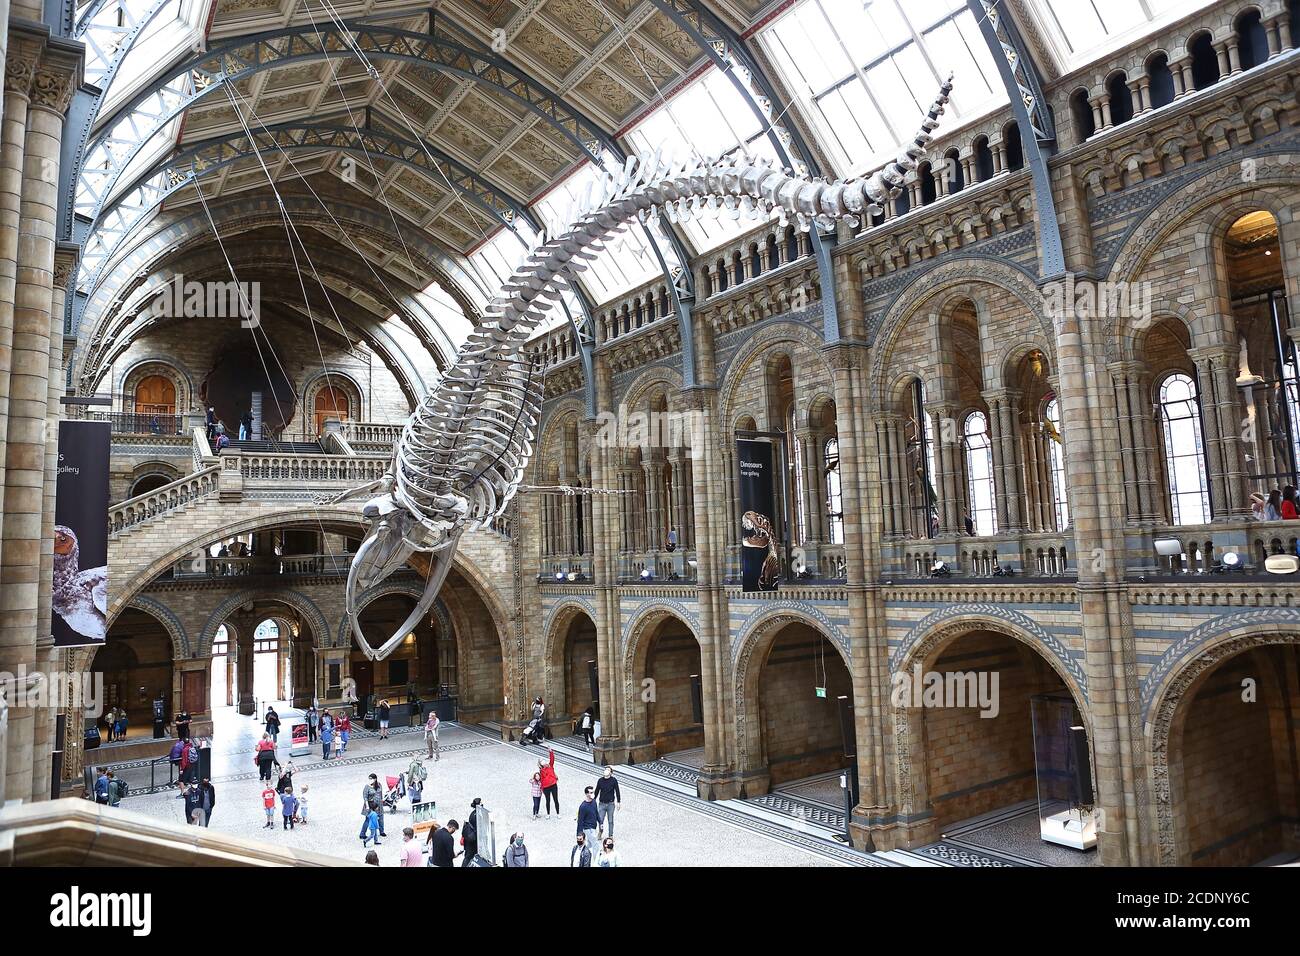 The Natural History Museum in London is a natural history museum that  exhibits a vast range of specimens from various segments of natural  history. It is one of three major museums on